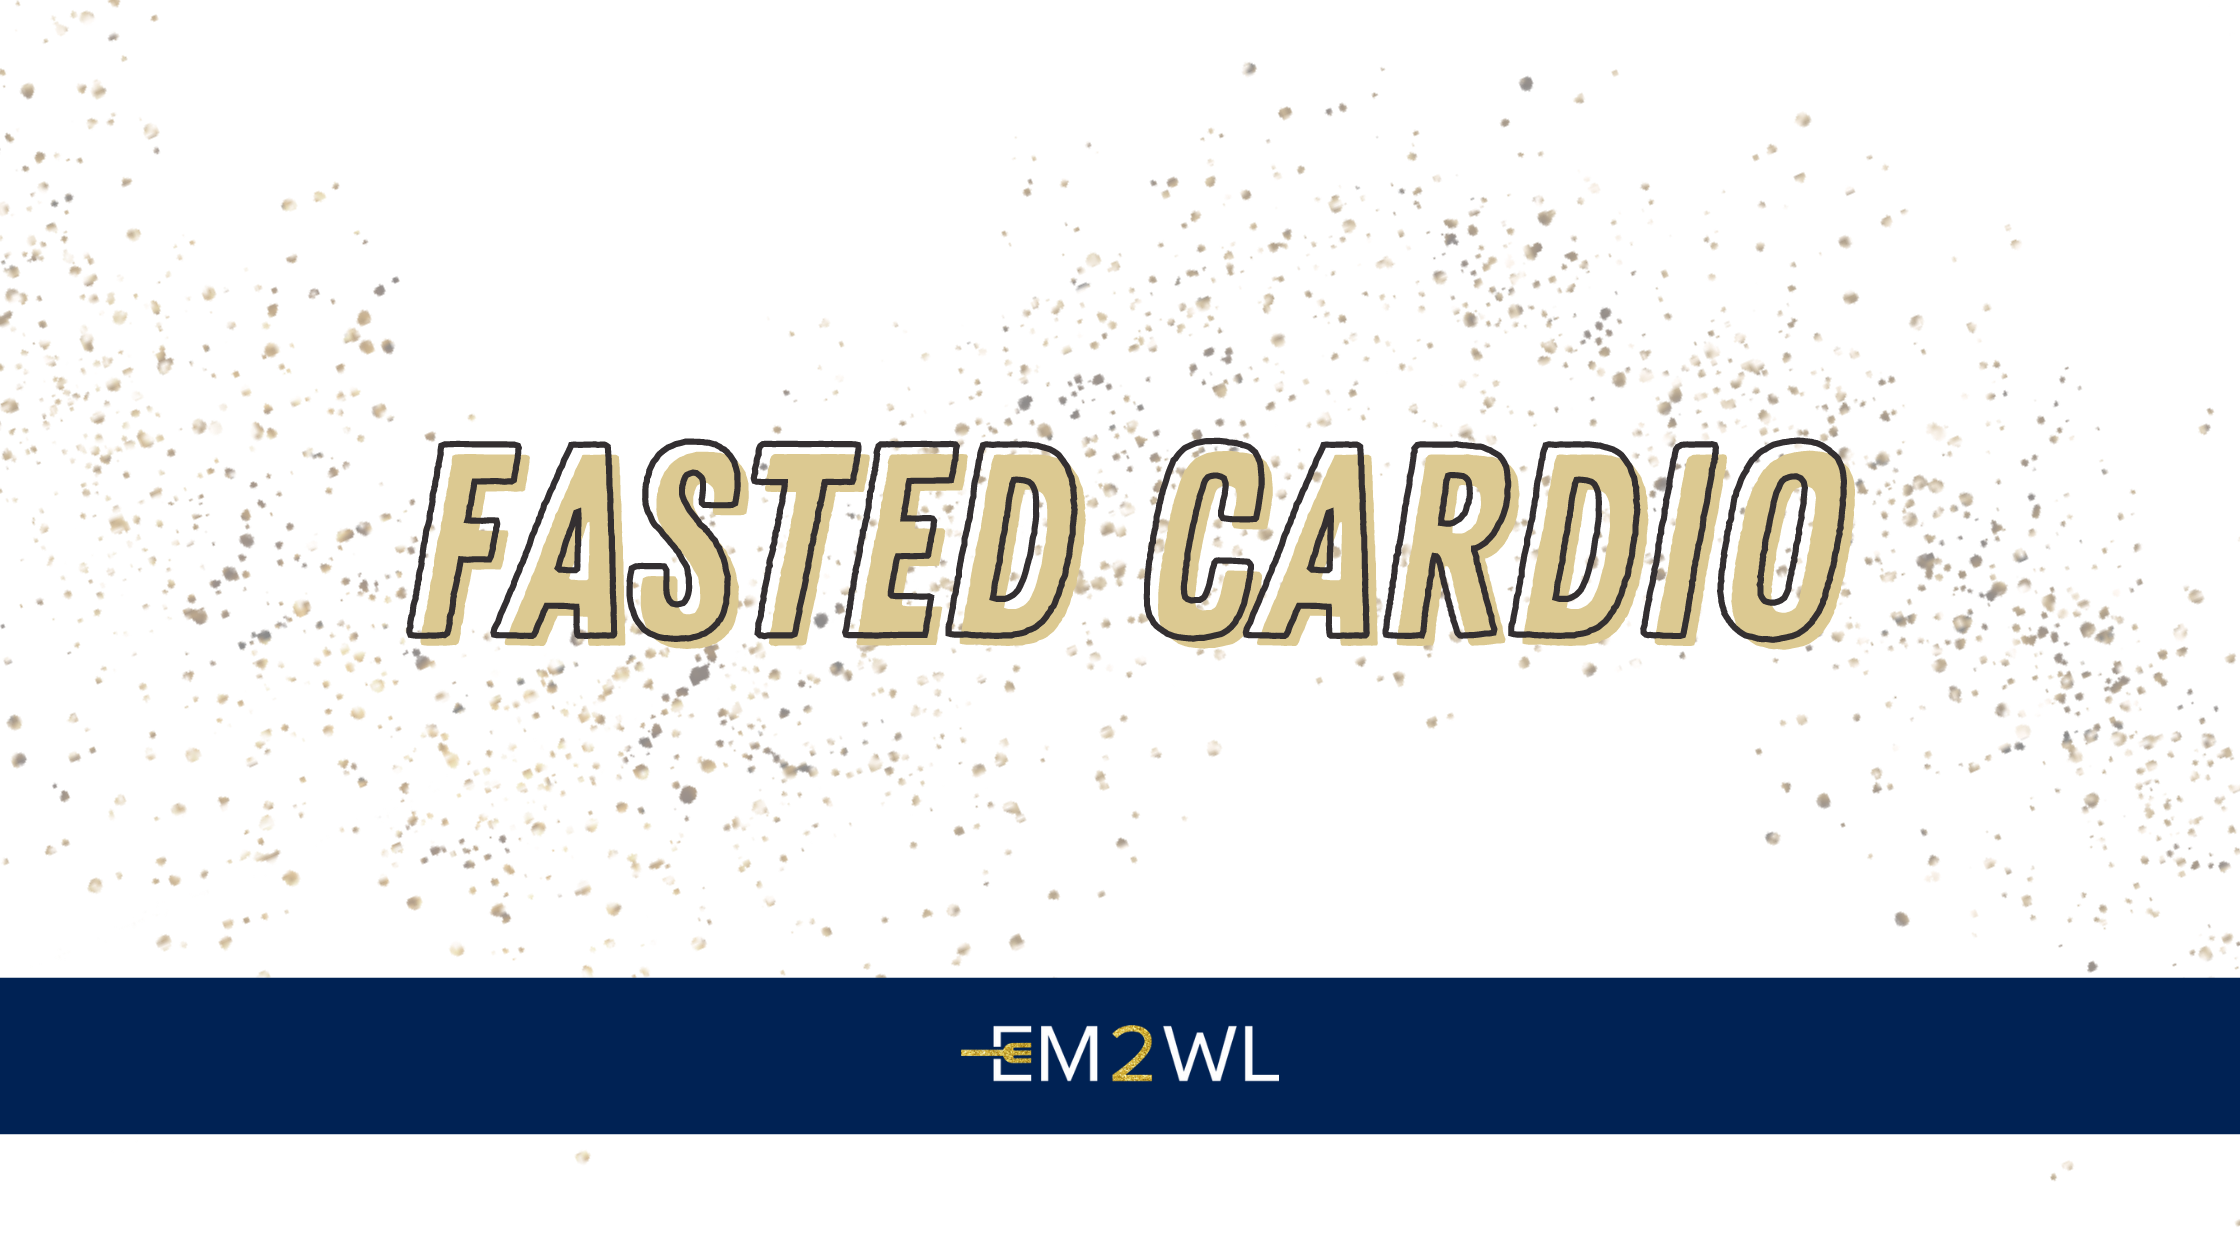 Is Fasted Cardio Really the Best Way to Burn Fat?